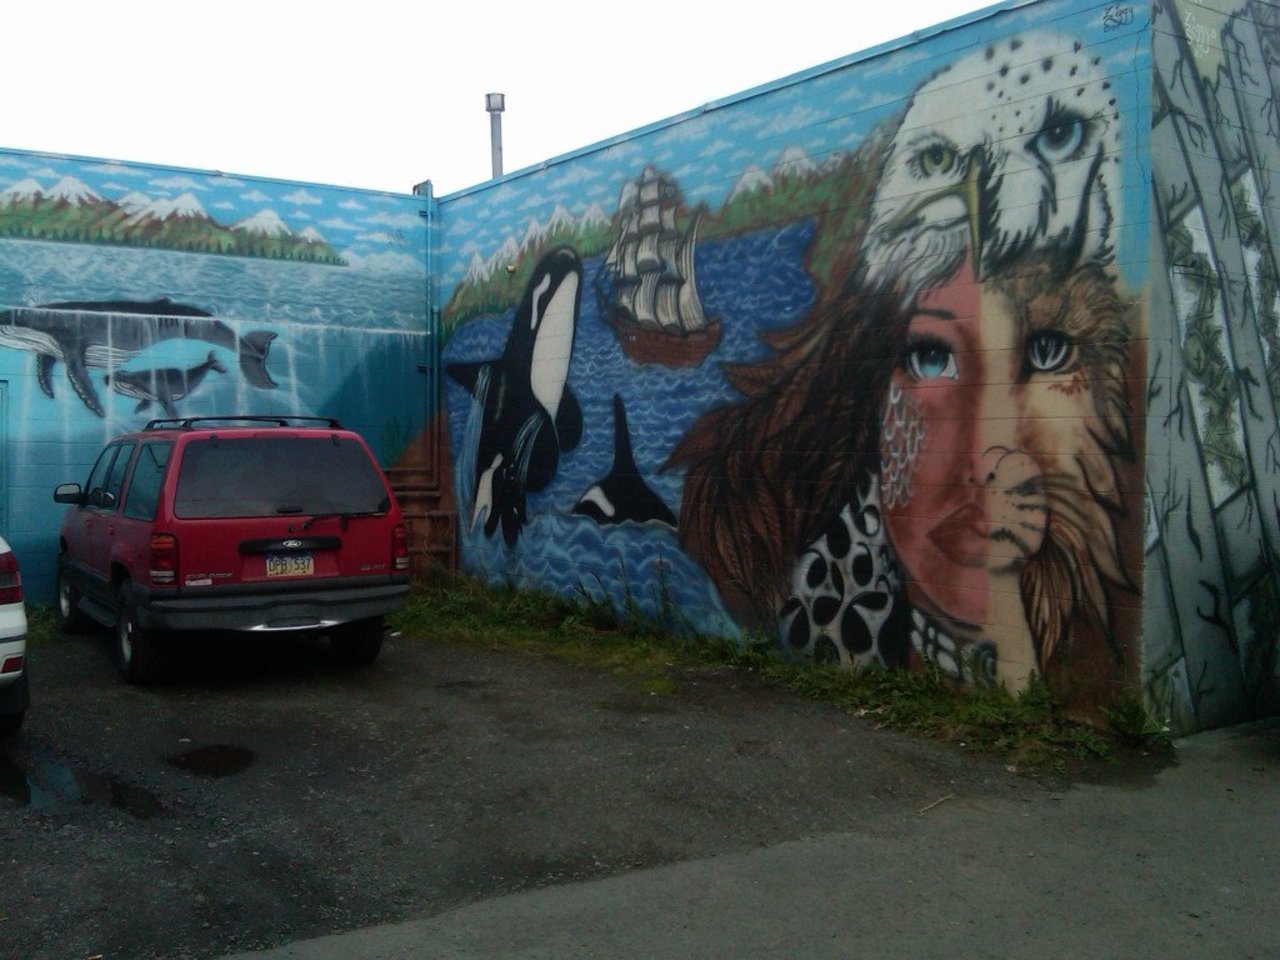 Murals and More in Anchorage (Archived Post). https://northierthanthou.com/2012/12/07/murals-and-more-in-anchorage/#Art #Streetart #travel #Alaska https://t.co/ex73mZMh55